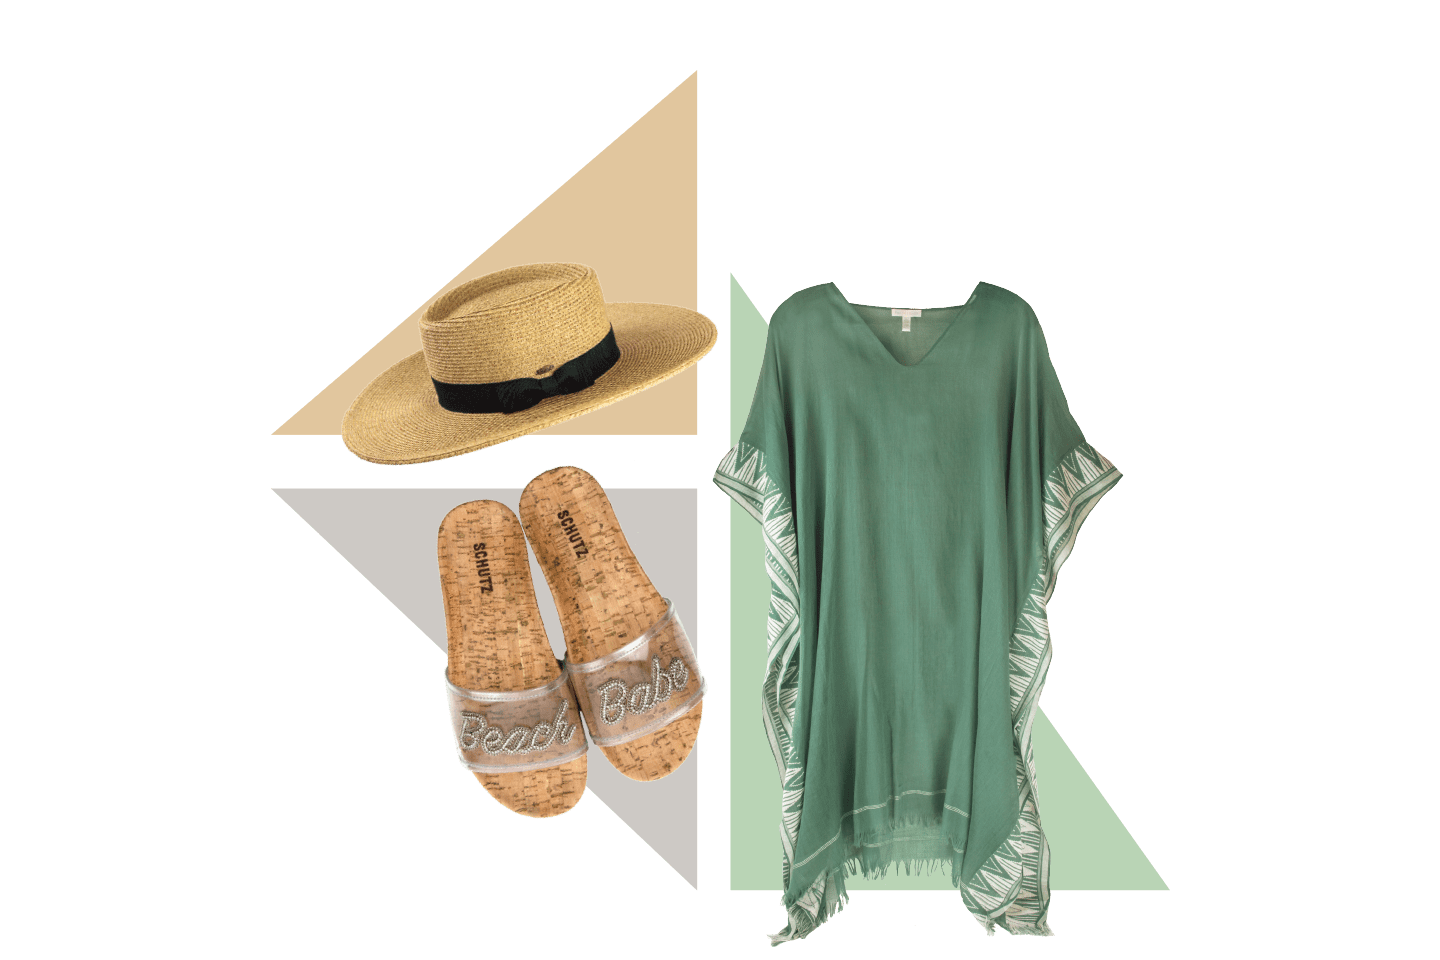 Wide brimmed hat, beach babe sandals, and green v-neck poncho cover up in chattanooga